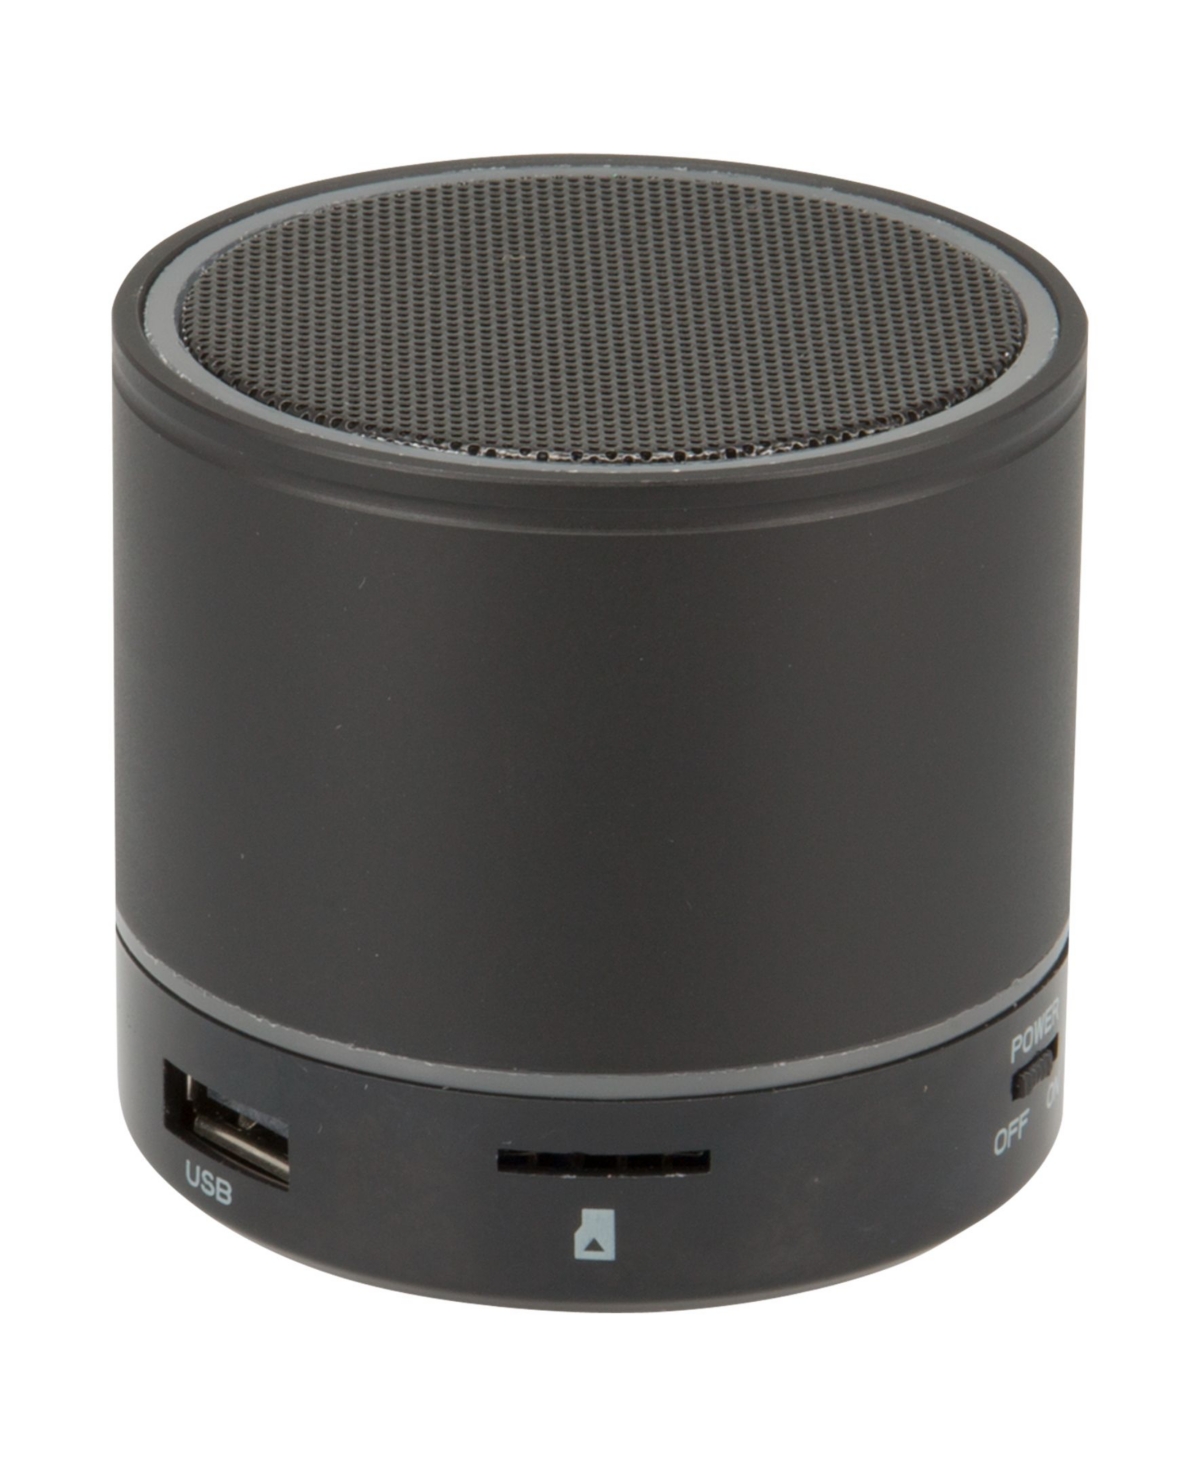 Ilive Color Changing Wireless Speaker In Black